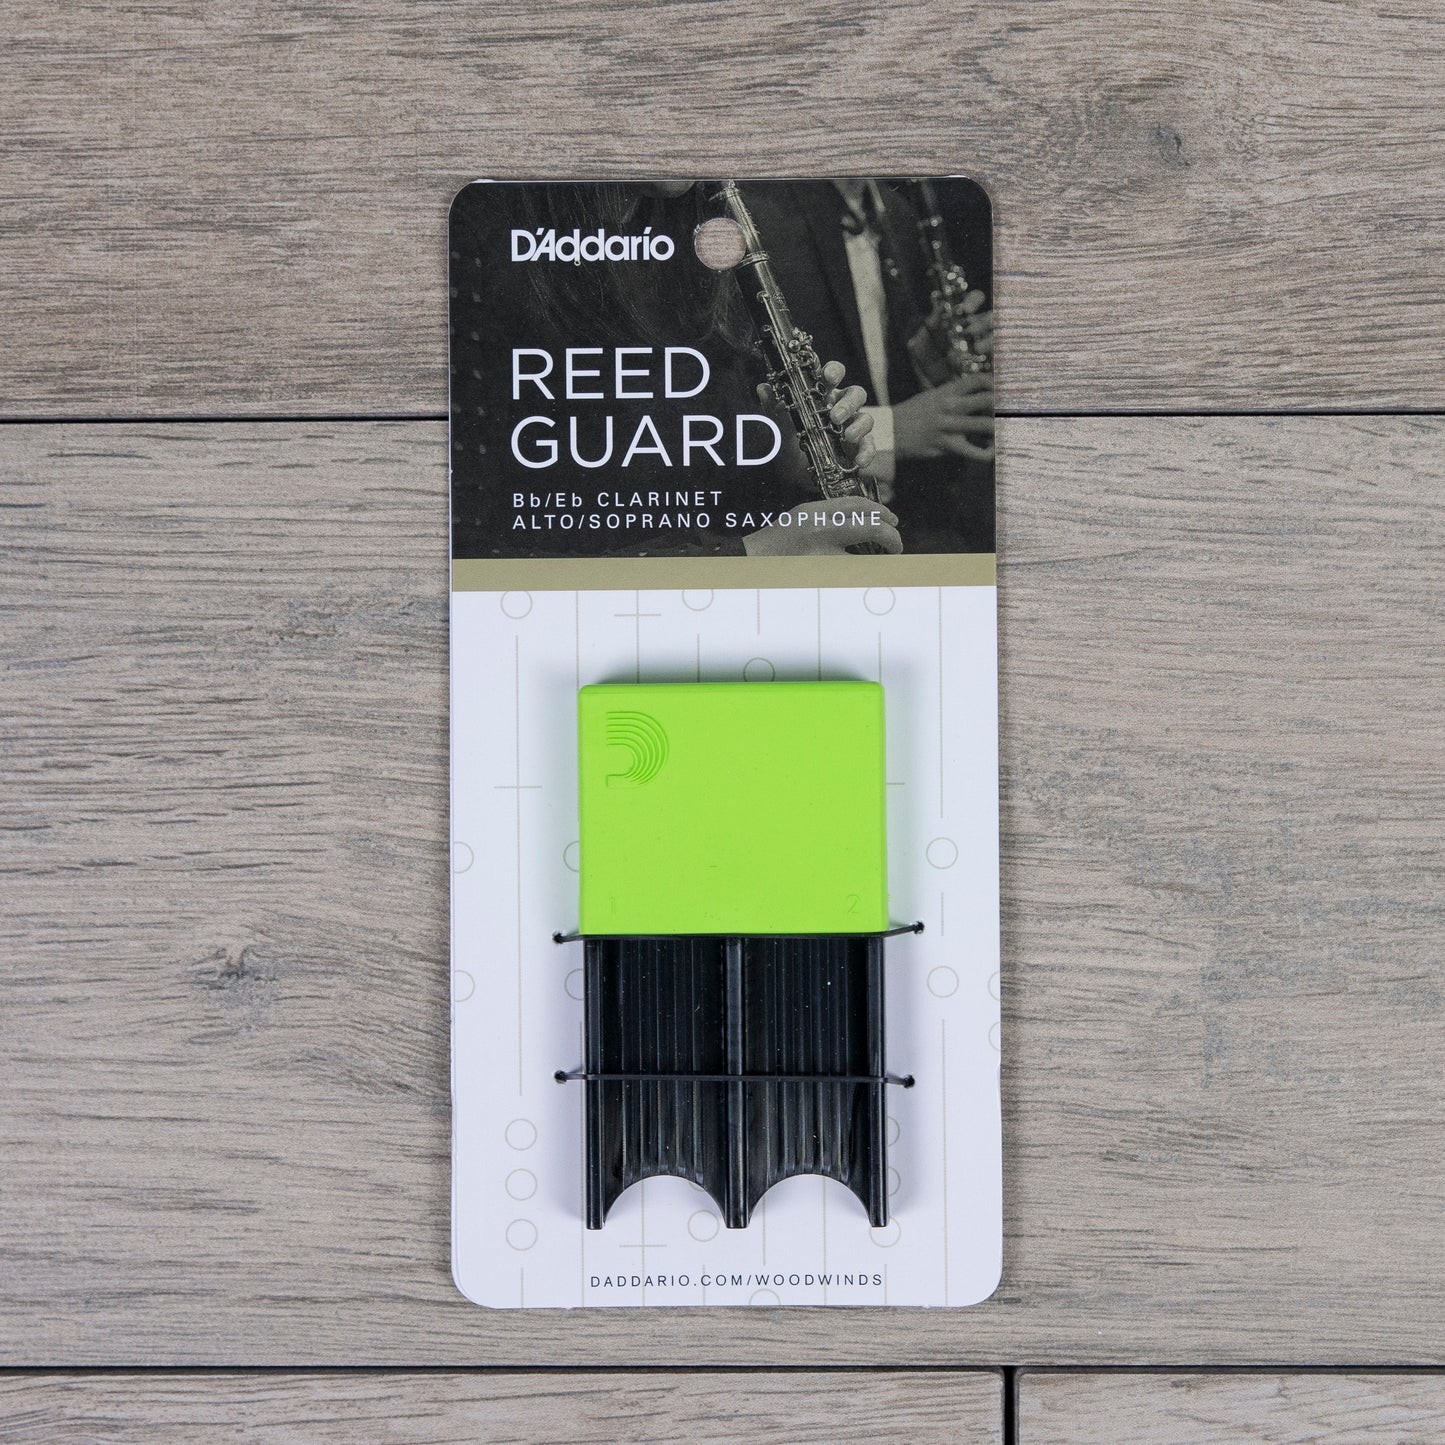 D'Addario Alto Sax/Clarinet Reed Guard in Green (Holds 4 Reeds)